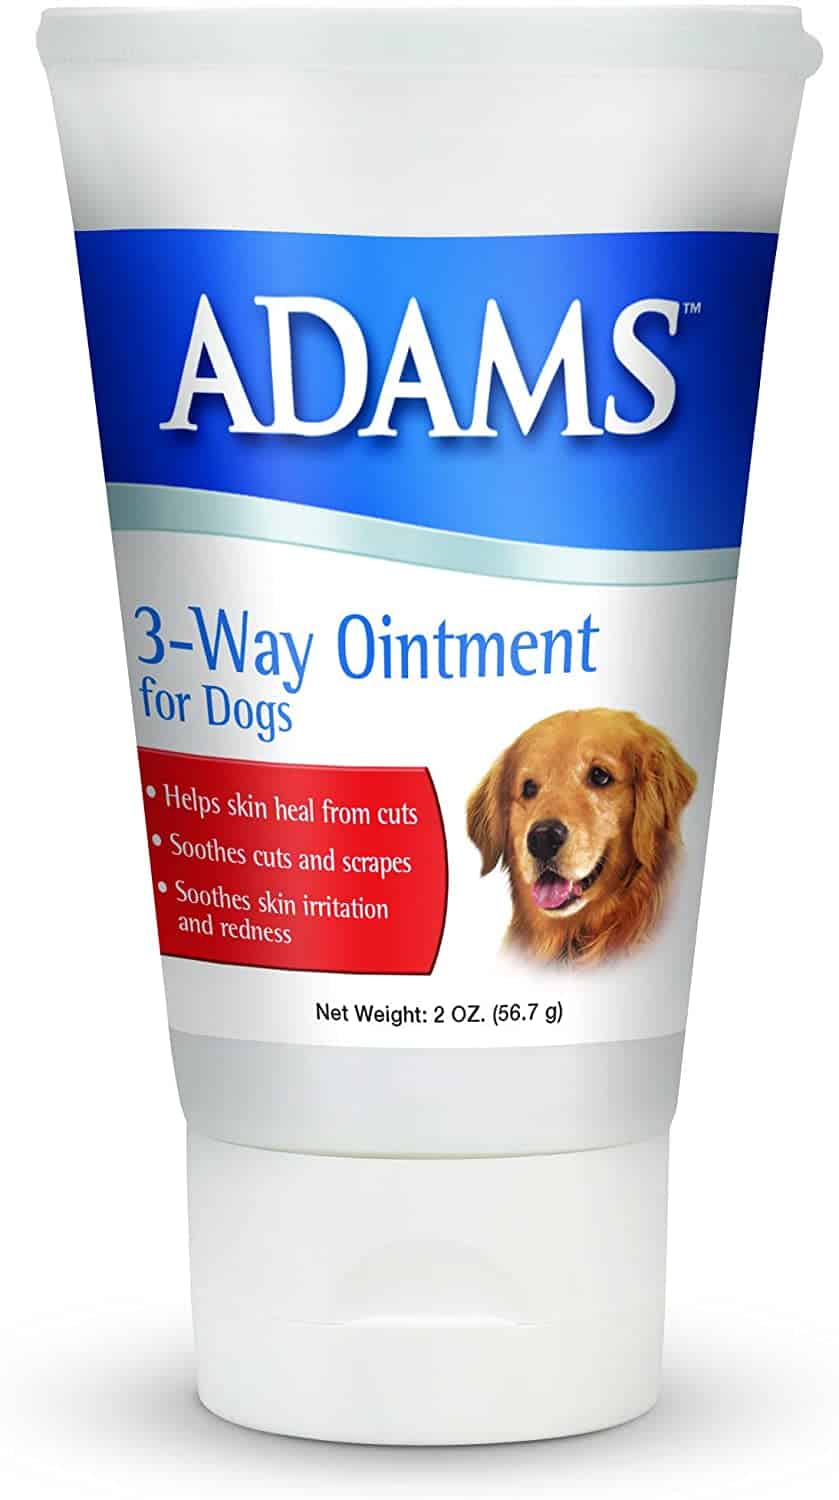 Adams 3 Way Ointment for Dogs, 2 oz $2.15 (REG $7.32)